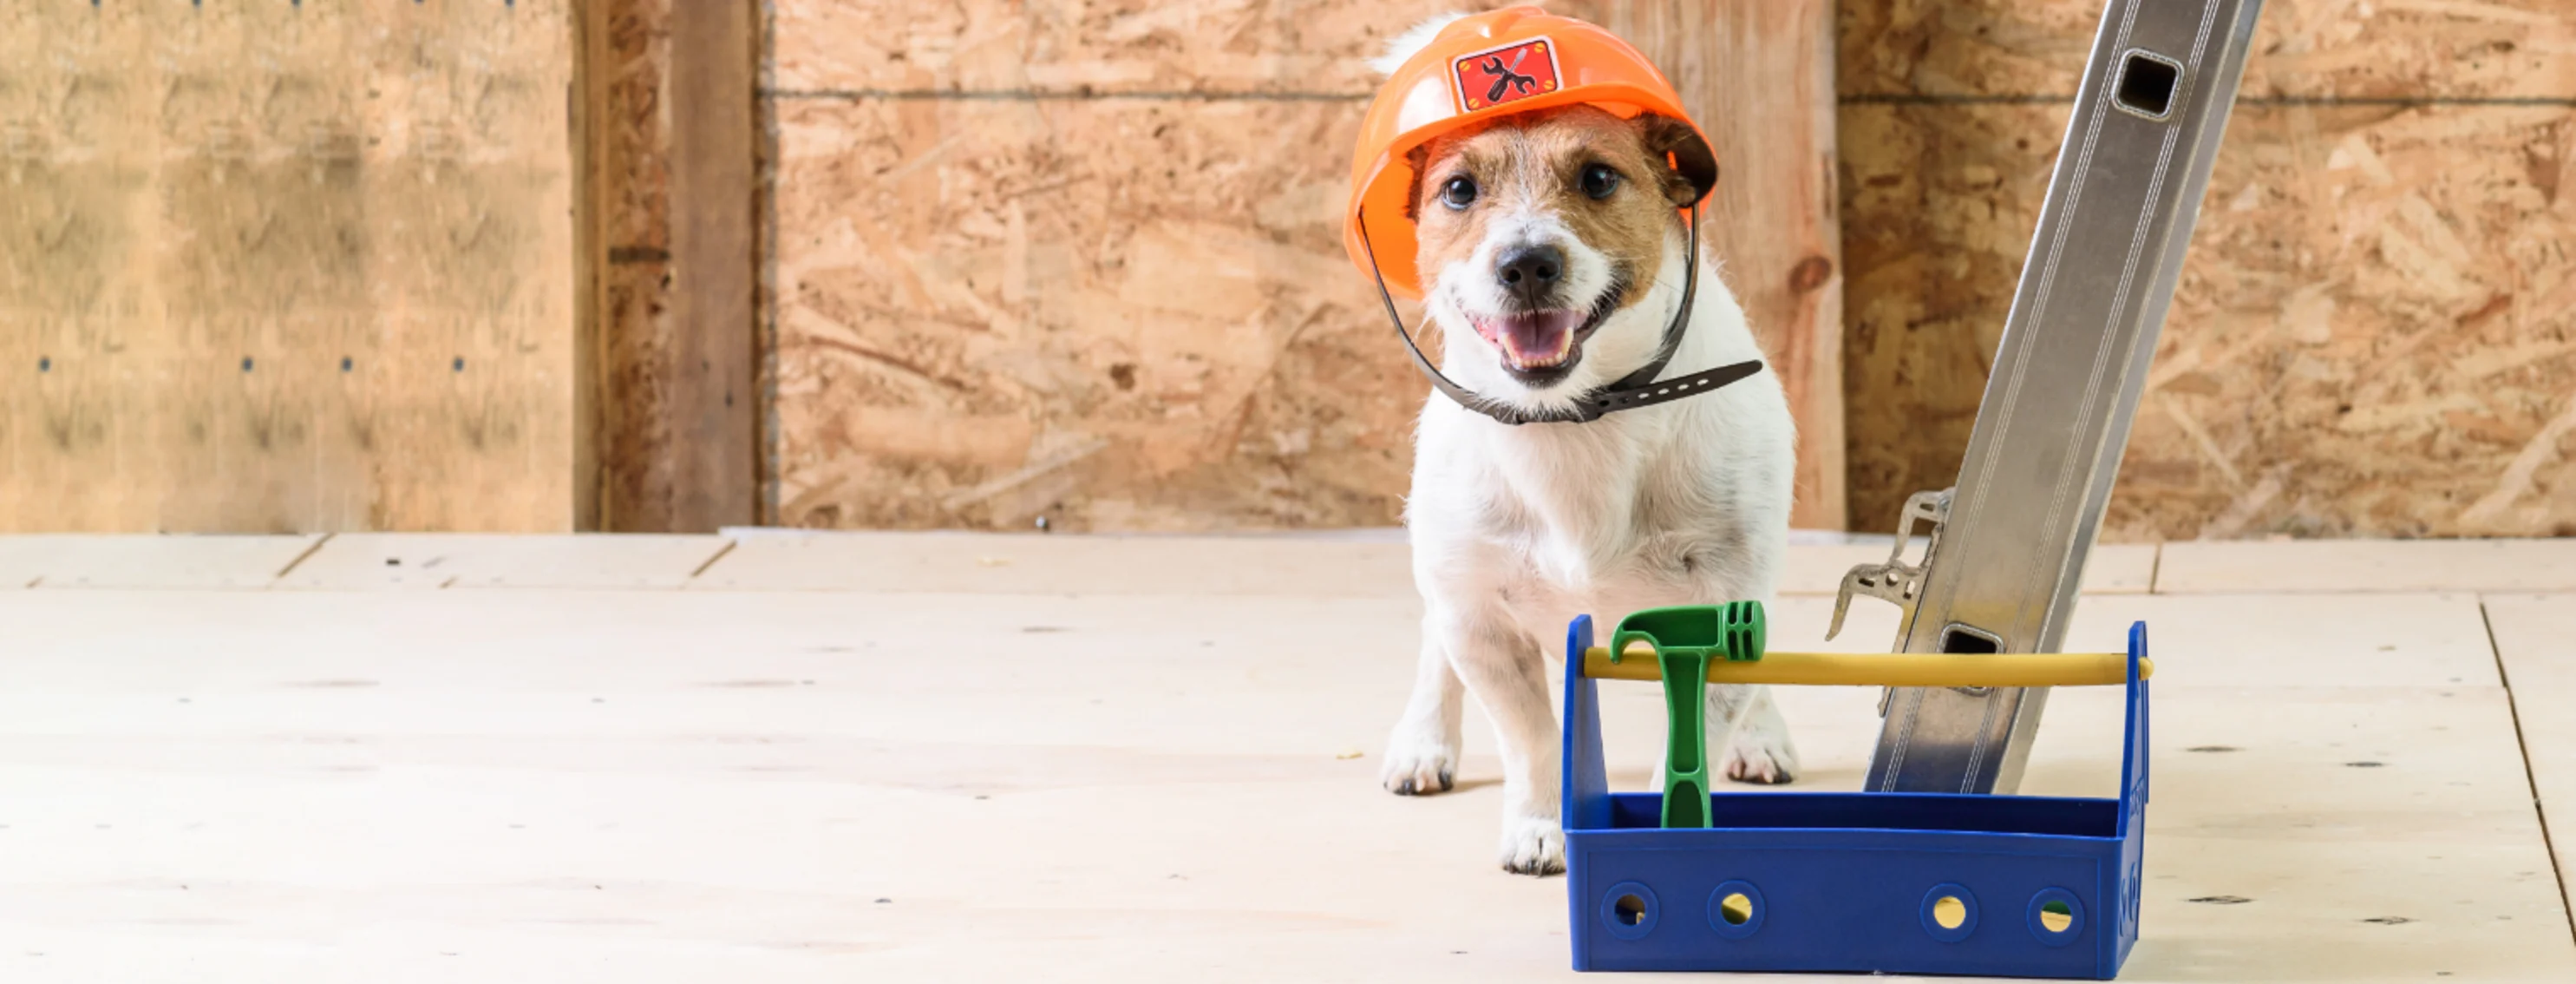 Dog wearing a helmet next to construction tools